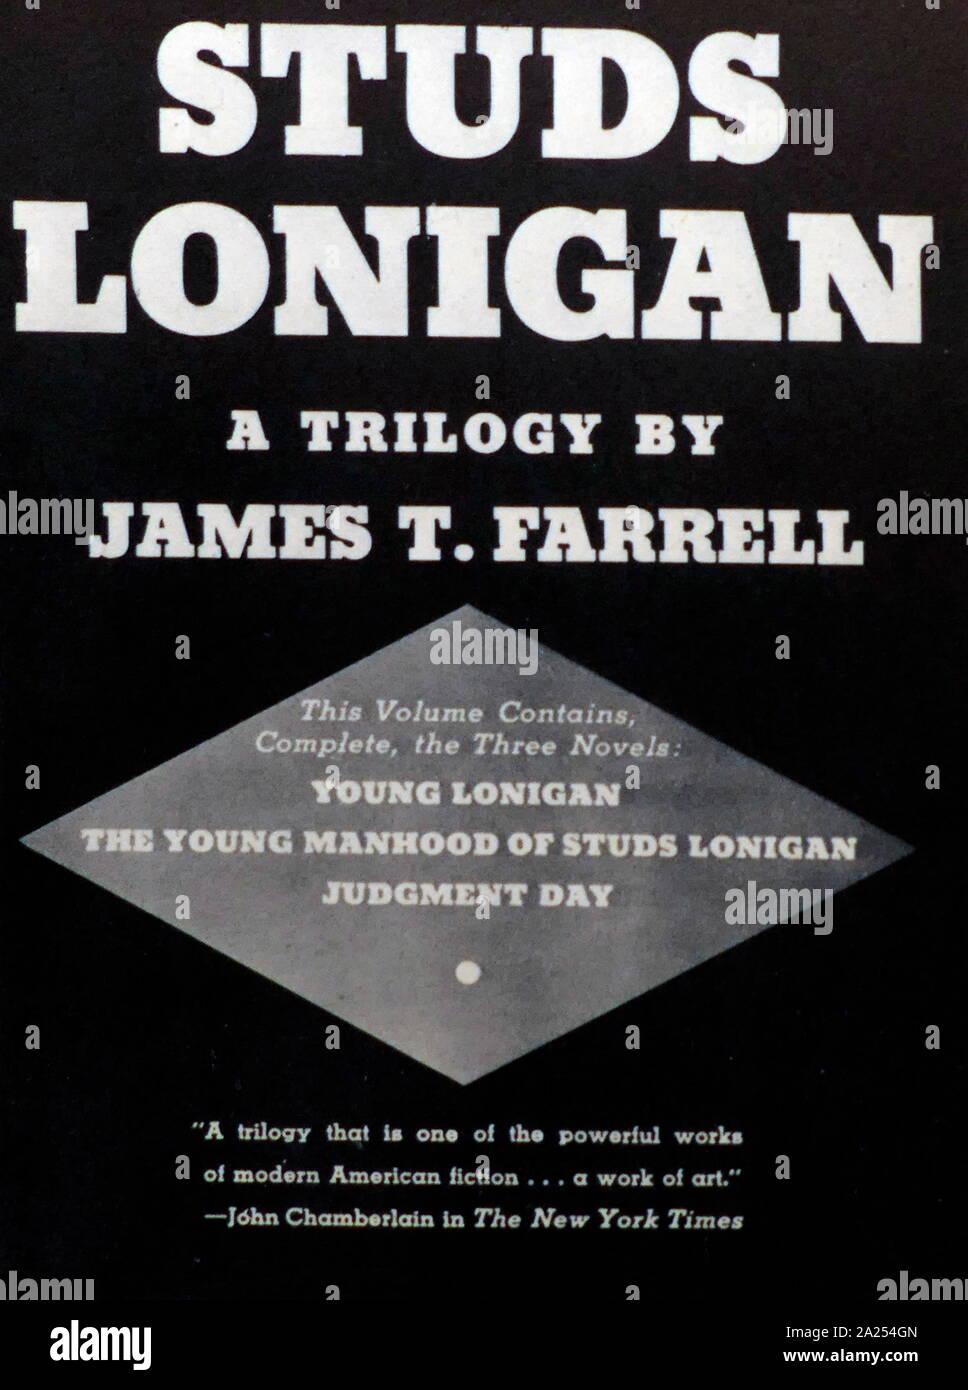 Studs Lonigan trilogy, by James Thomas Farrell (February 27, 1904 - August 22, 1979); American novelist The trilogy, which was made into a film in 1960 and a television series in 1979. Stock Photo